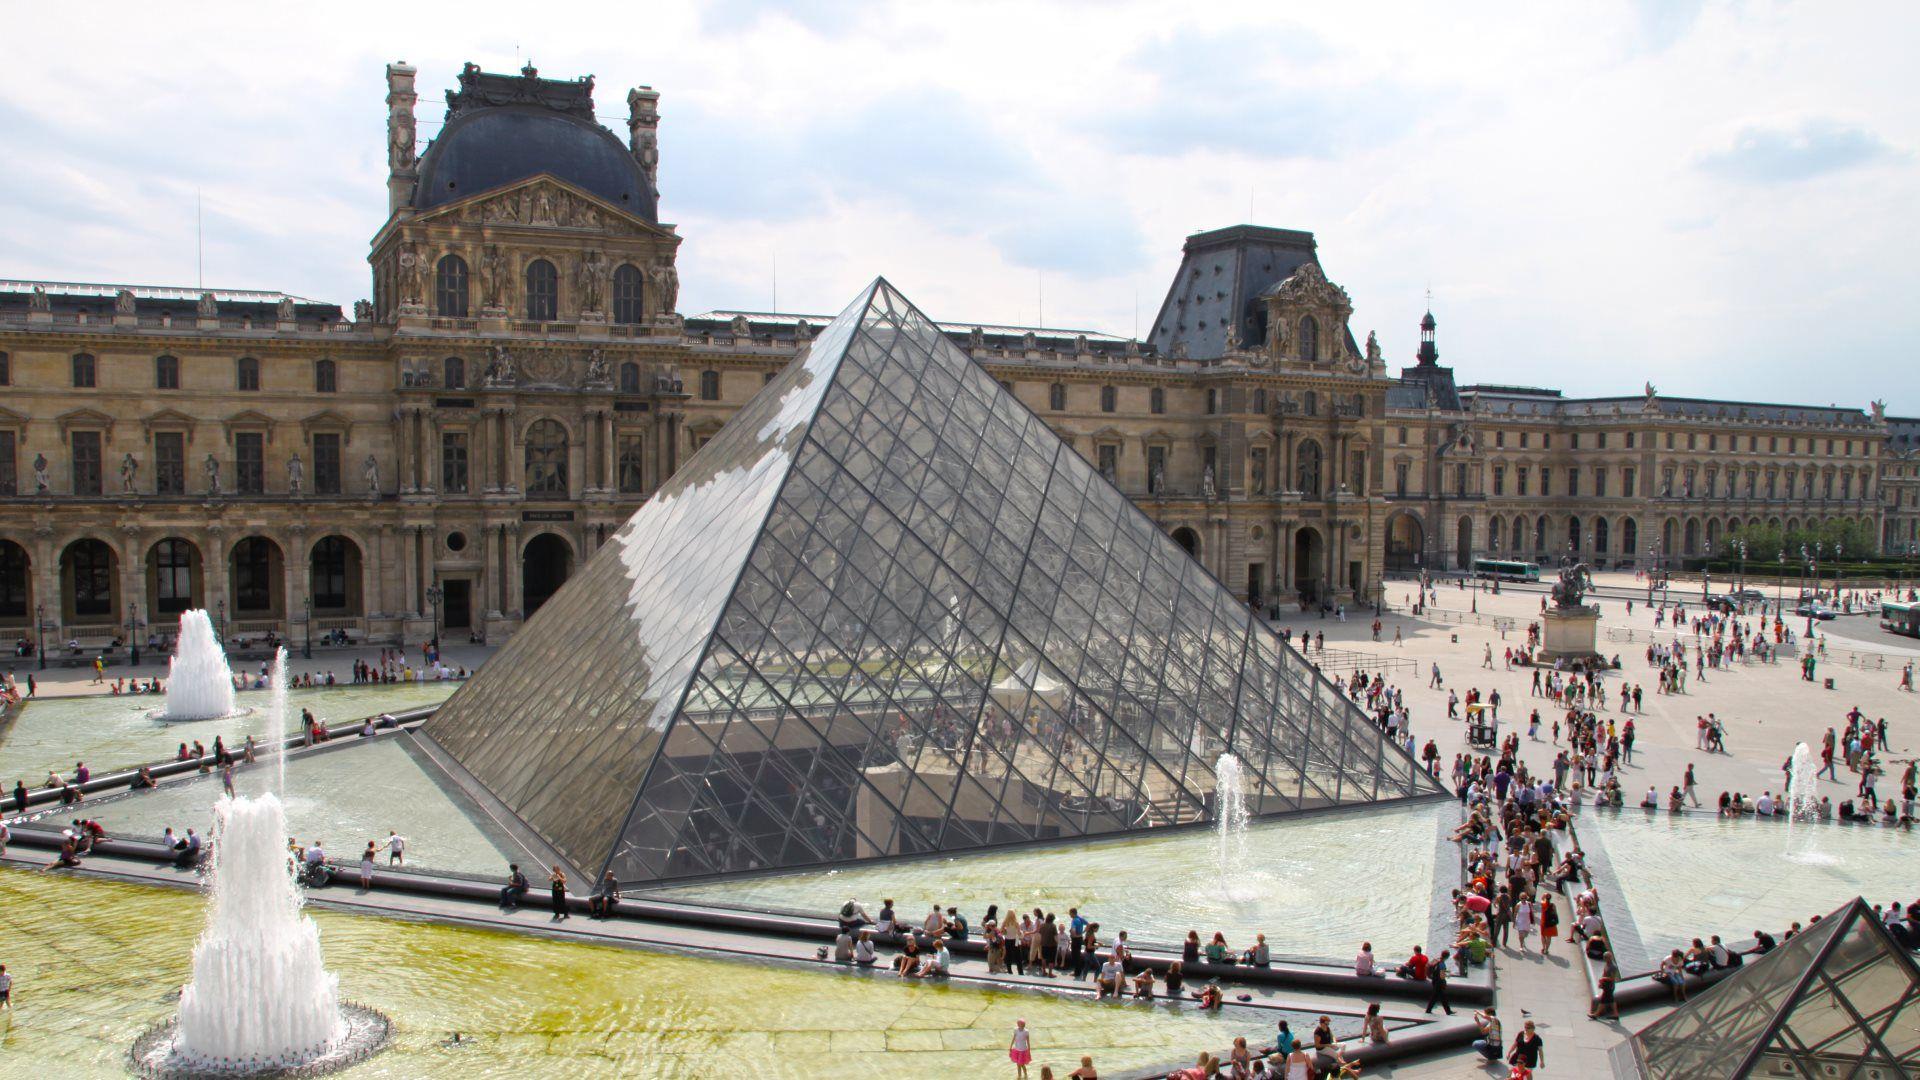 Louvre Museum Wallpaper in HD, 4K and wide sizes